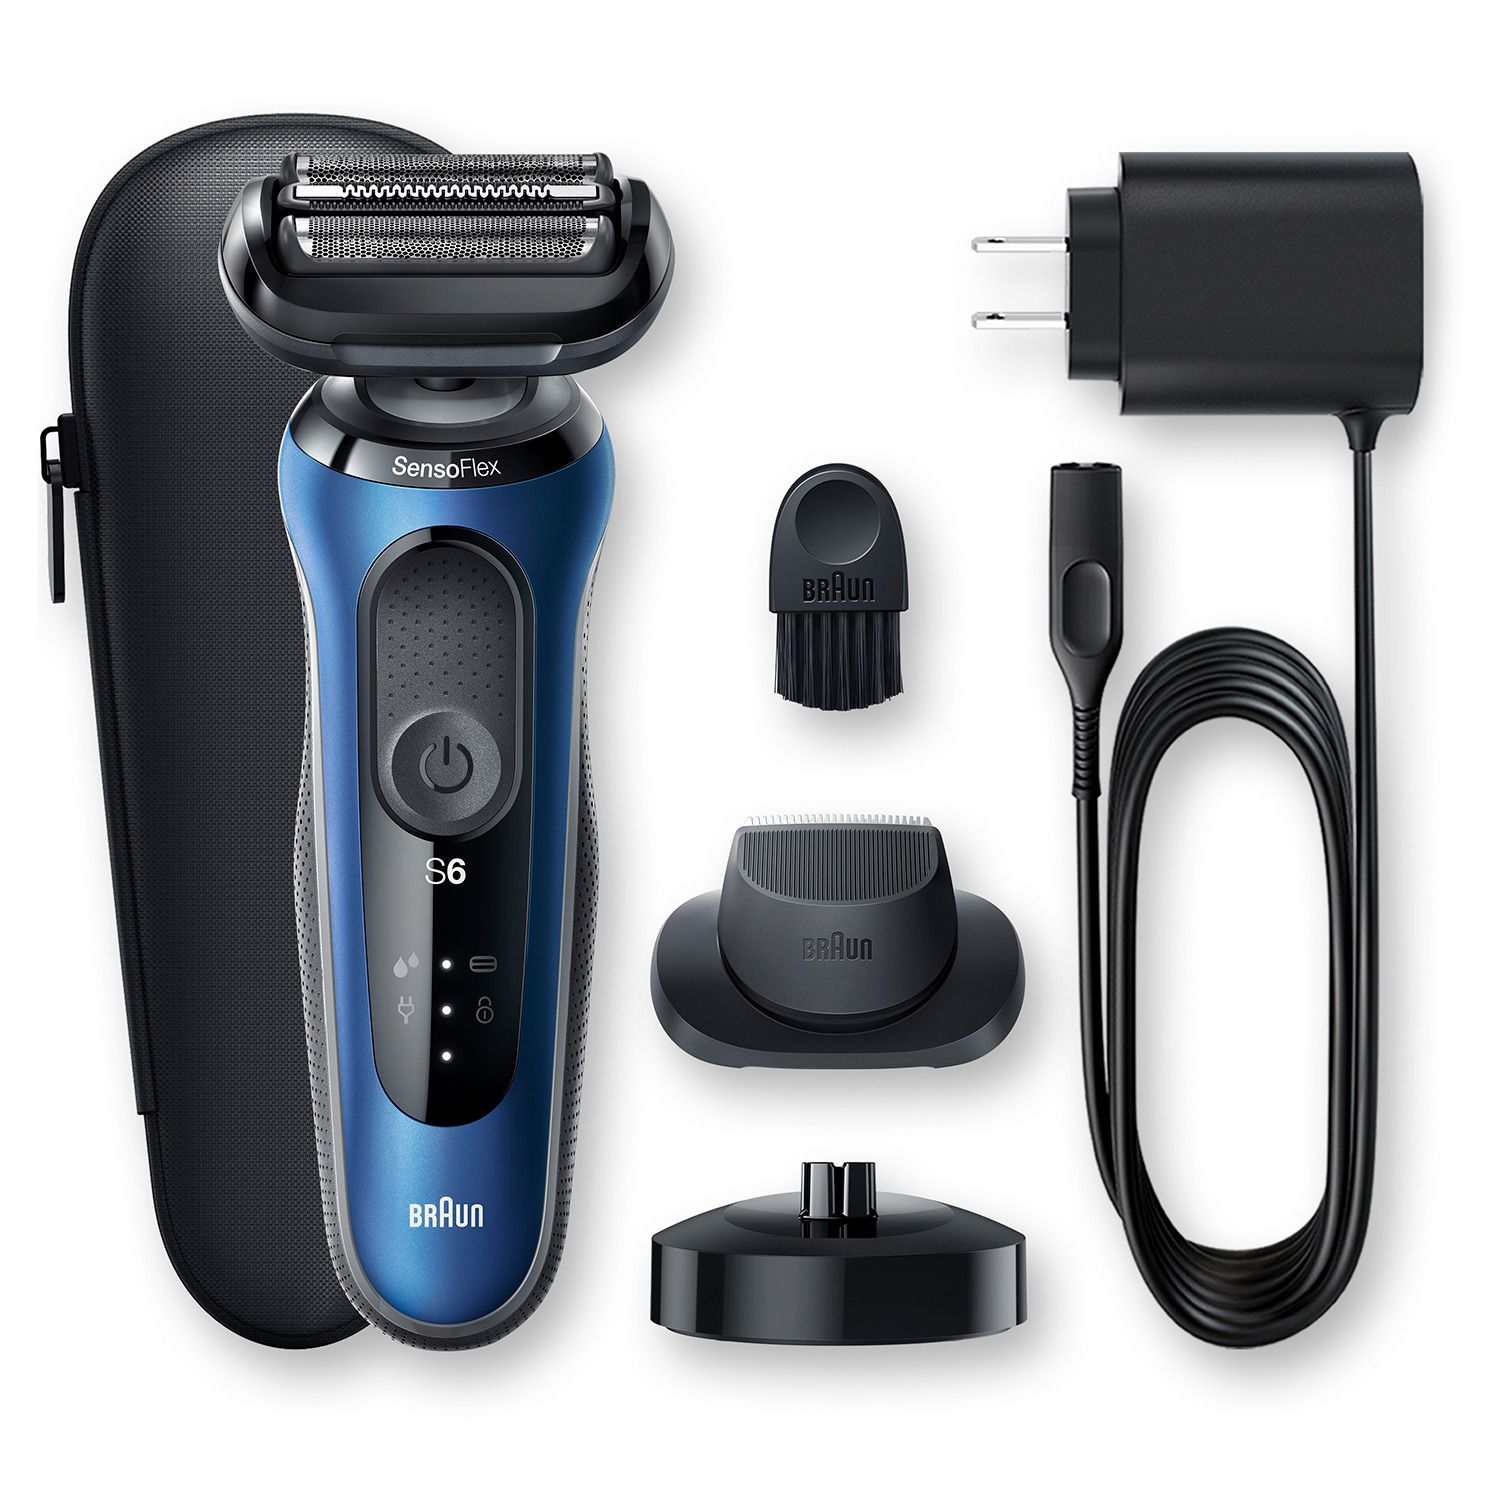 braun shaver and trimmer